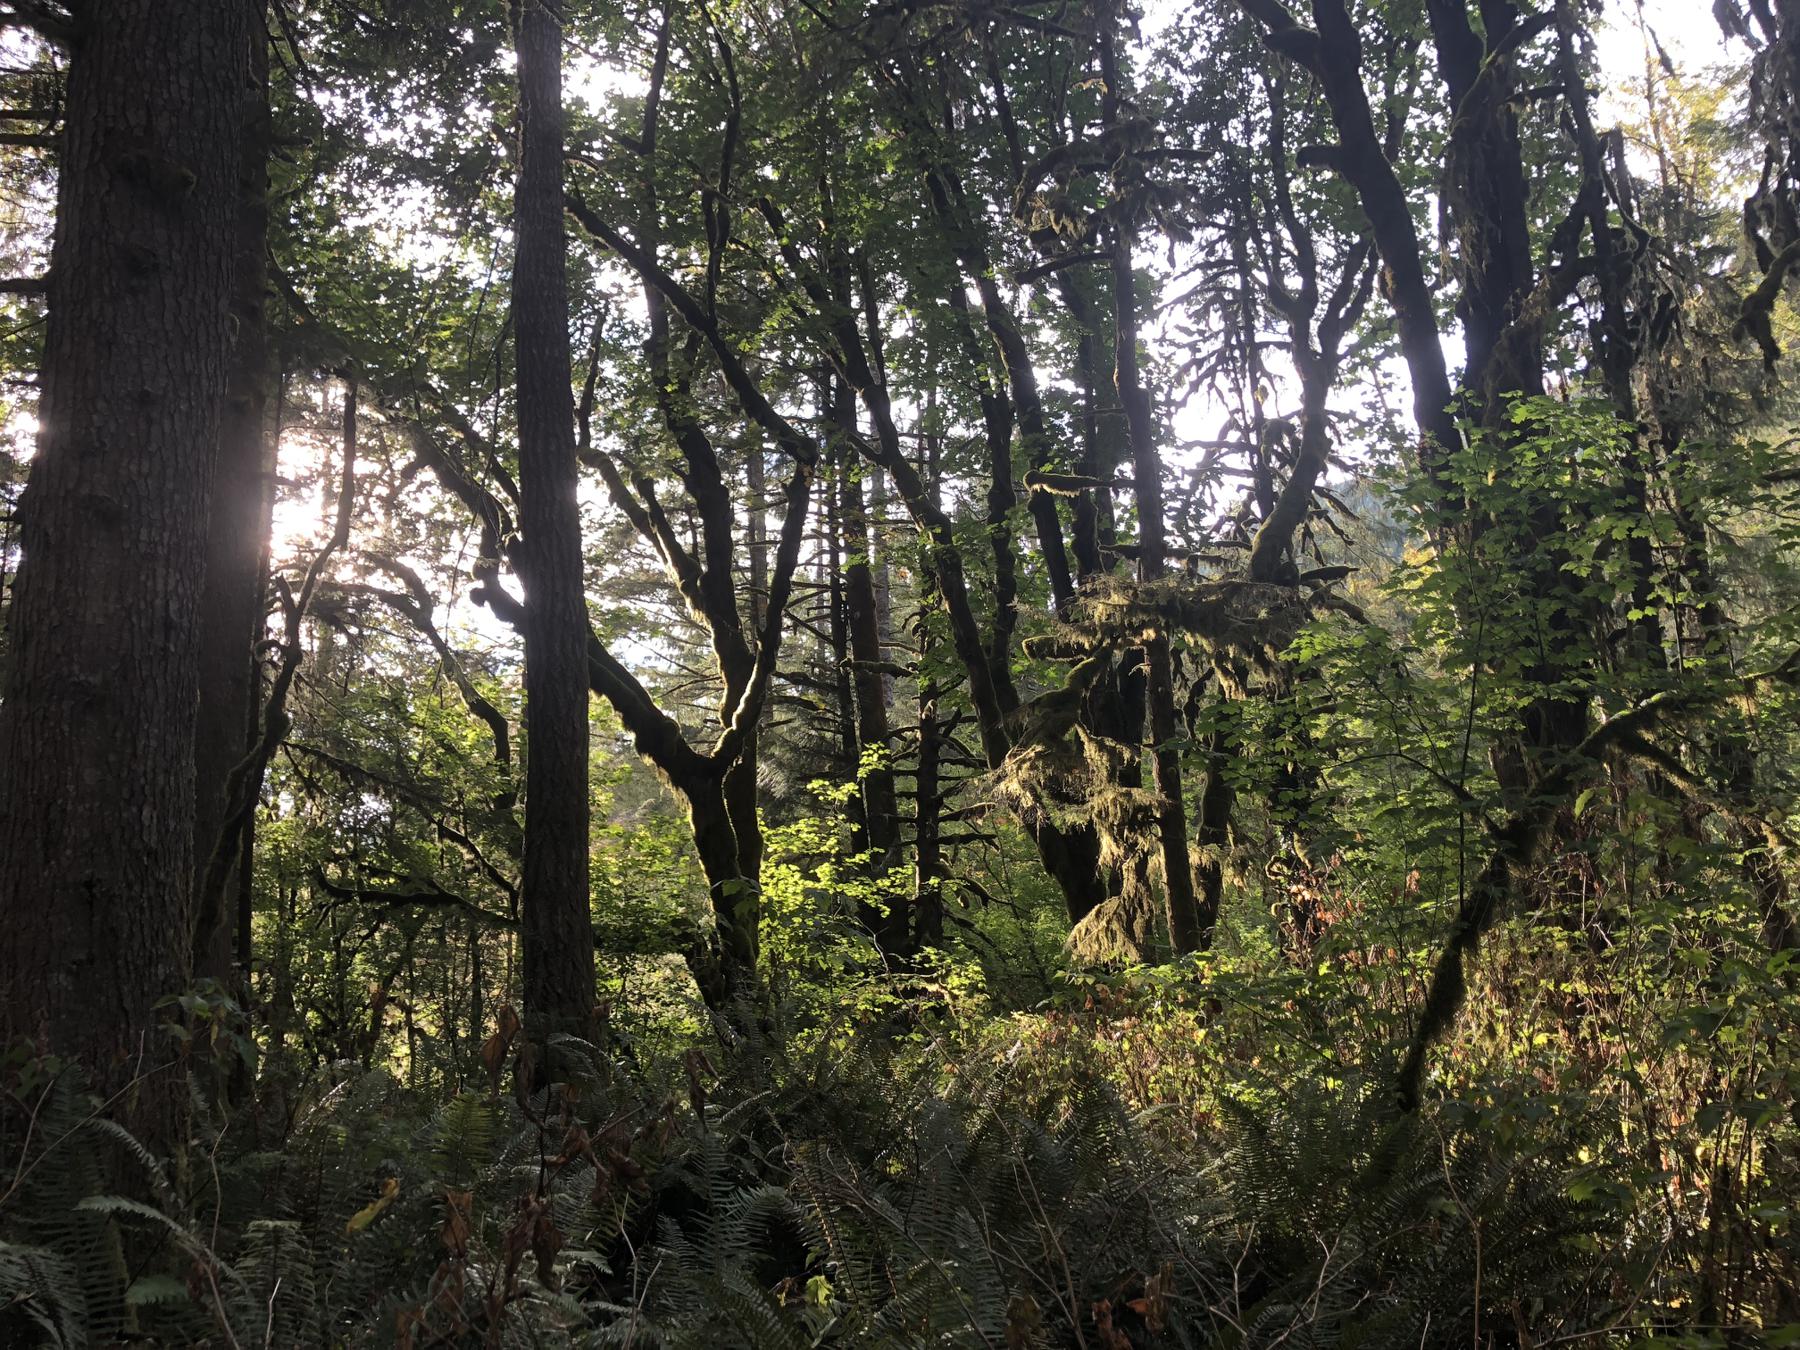 Afternoon sun through trees and undergrowth